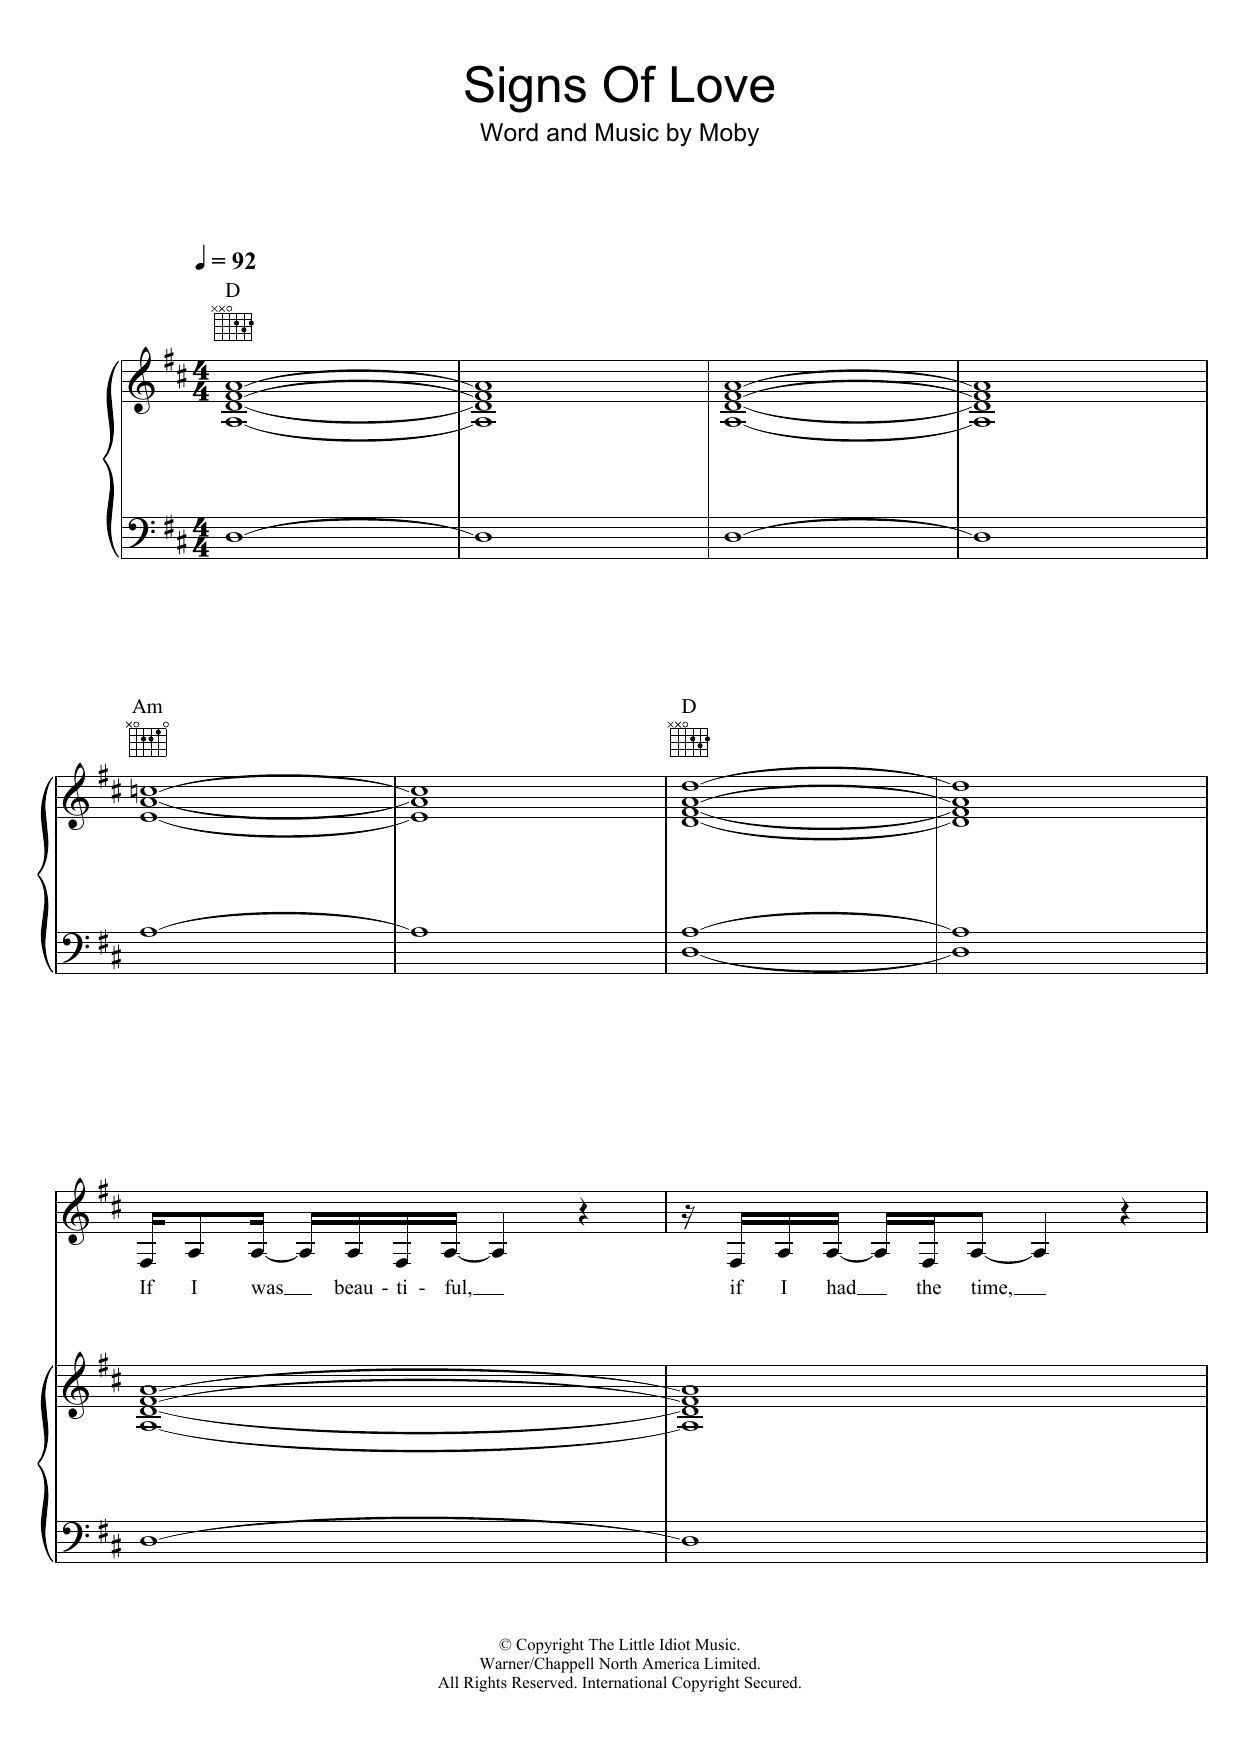 Download Moby Signs Of Love Sheet Music